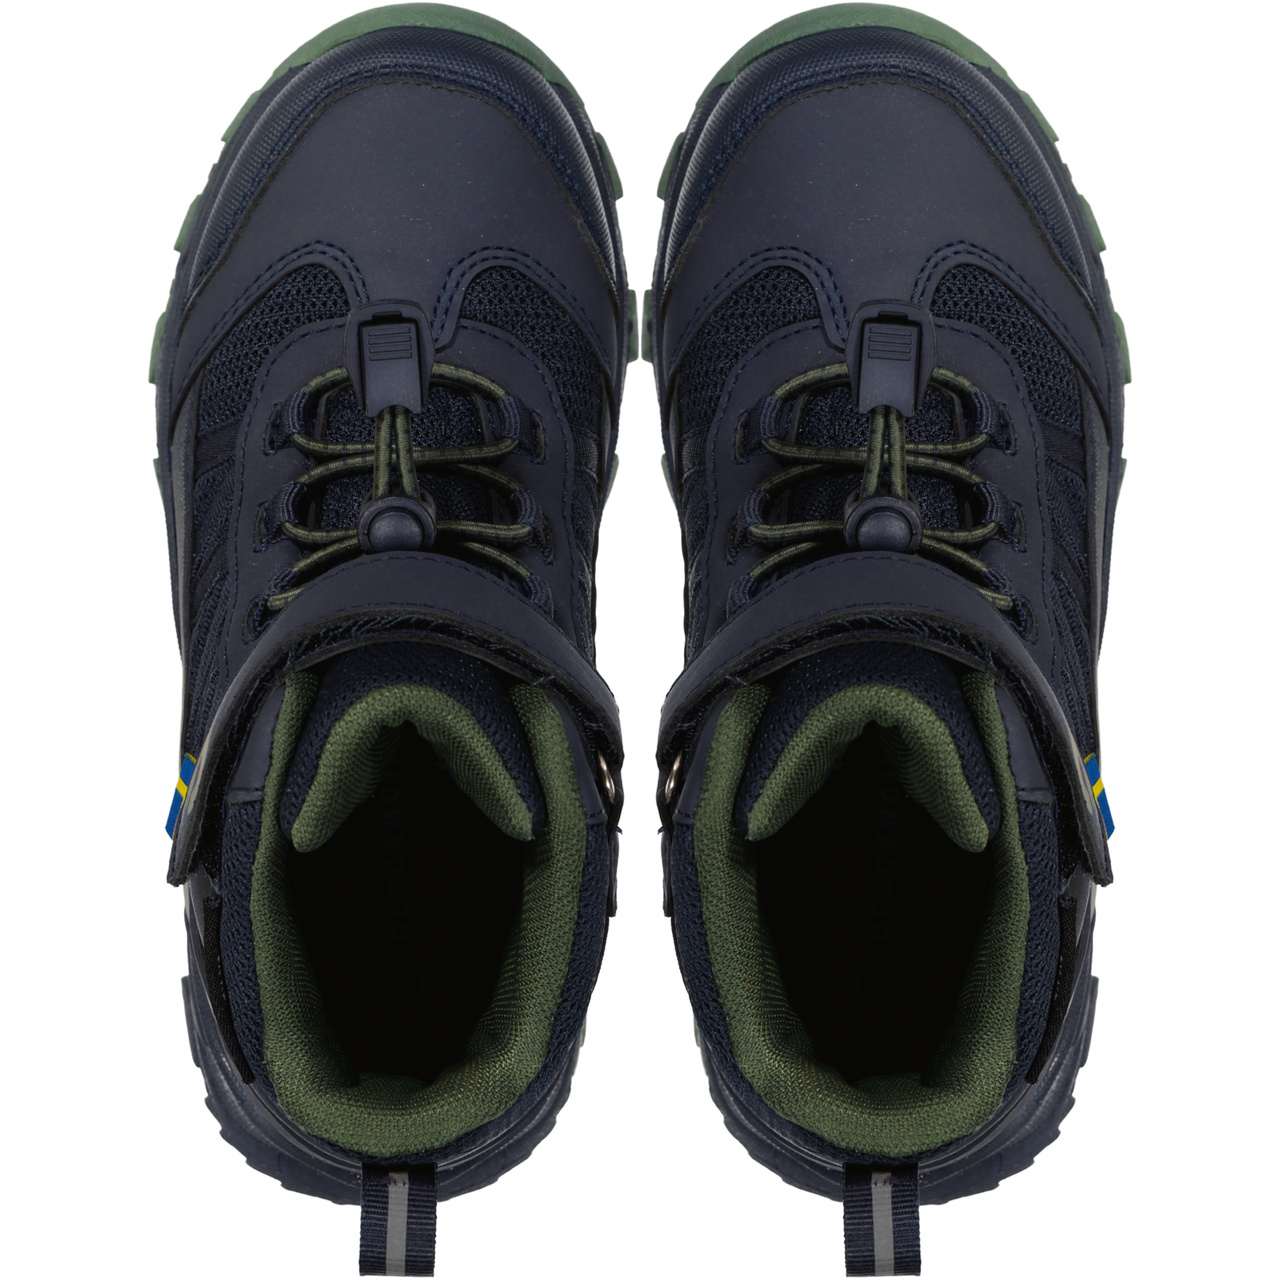 All weather shoes Navy  25